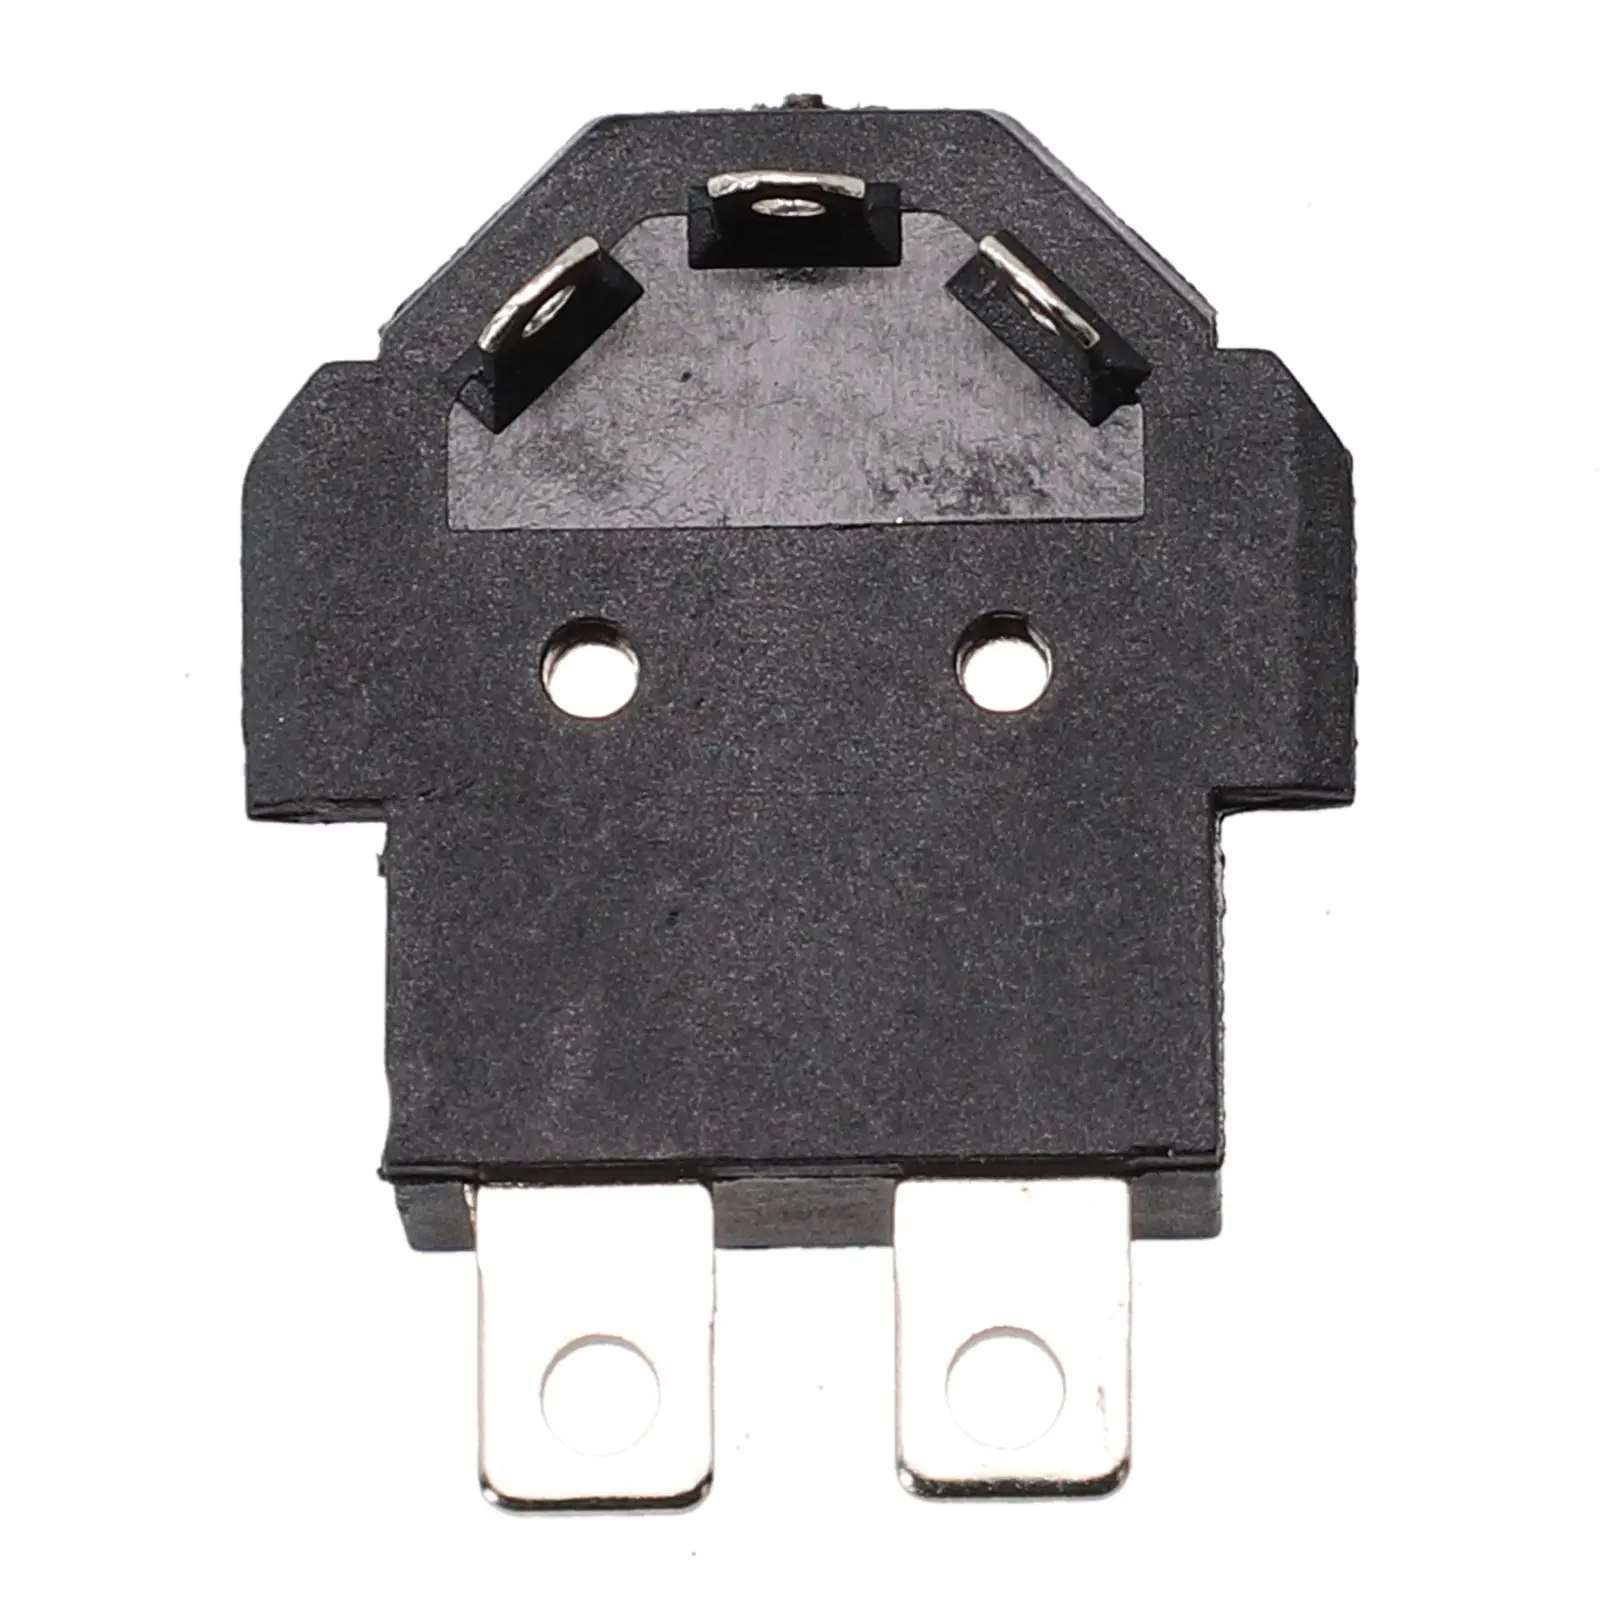 1PC Battery Connector Terminal Block Replacement Battery Adapter Socket For Li-Ion Electrical Power Tools